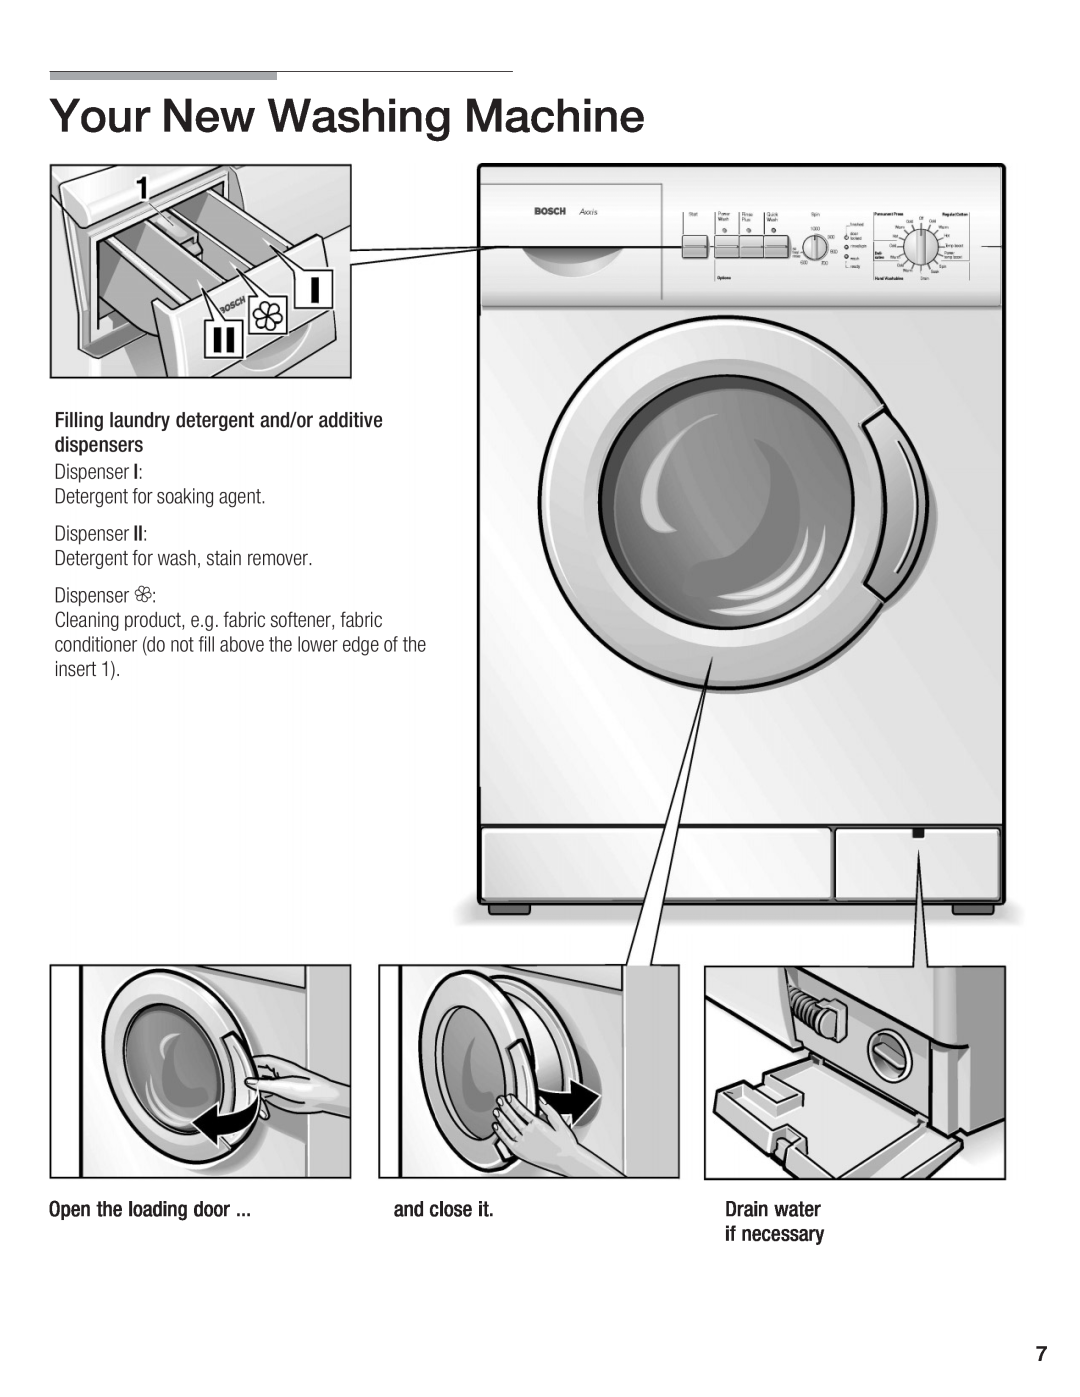 Bosch Appliances WFL 2050, WFL 2060 manual Your New Washing Machine, D D a a D D a a D a d a a d d a d, dg d 